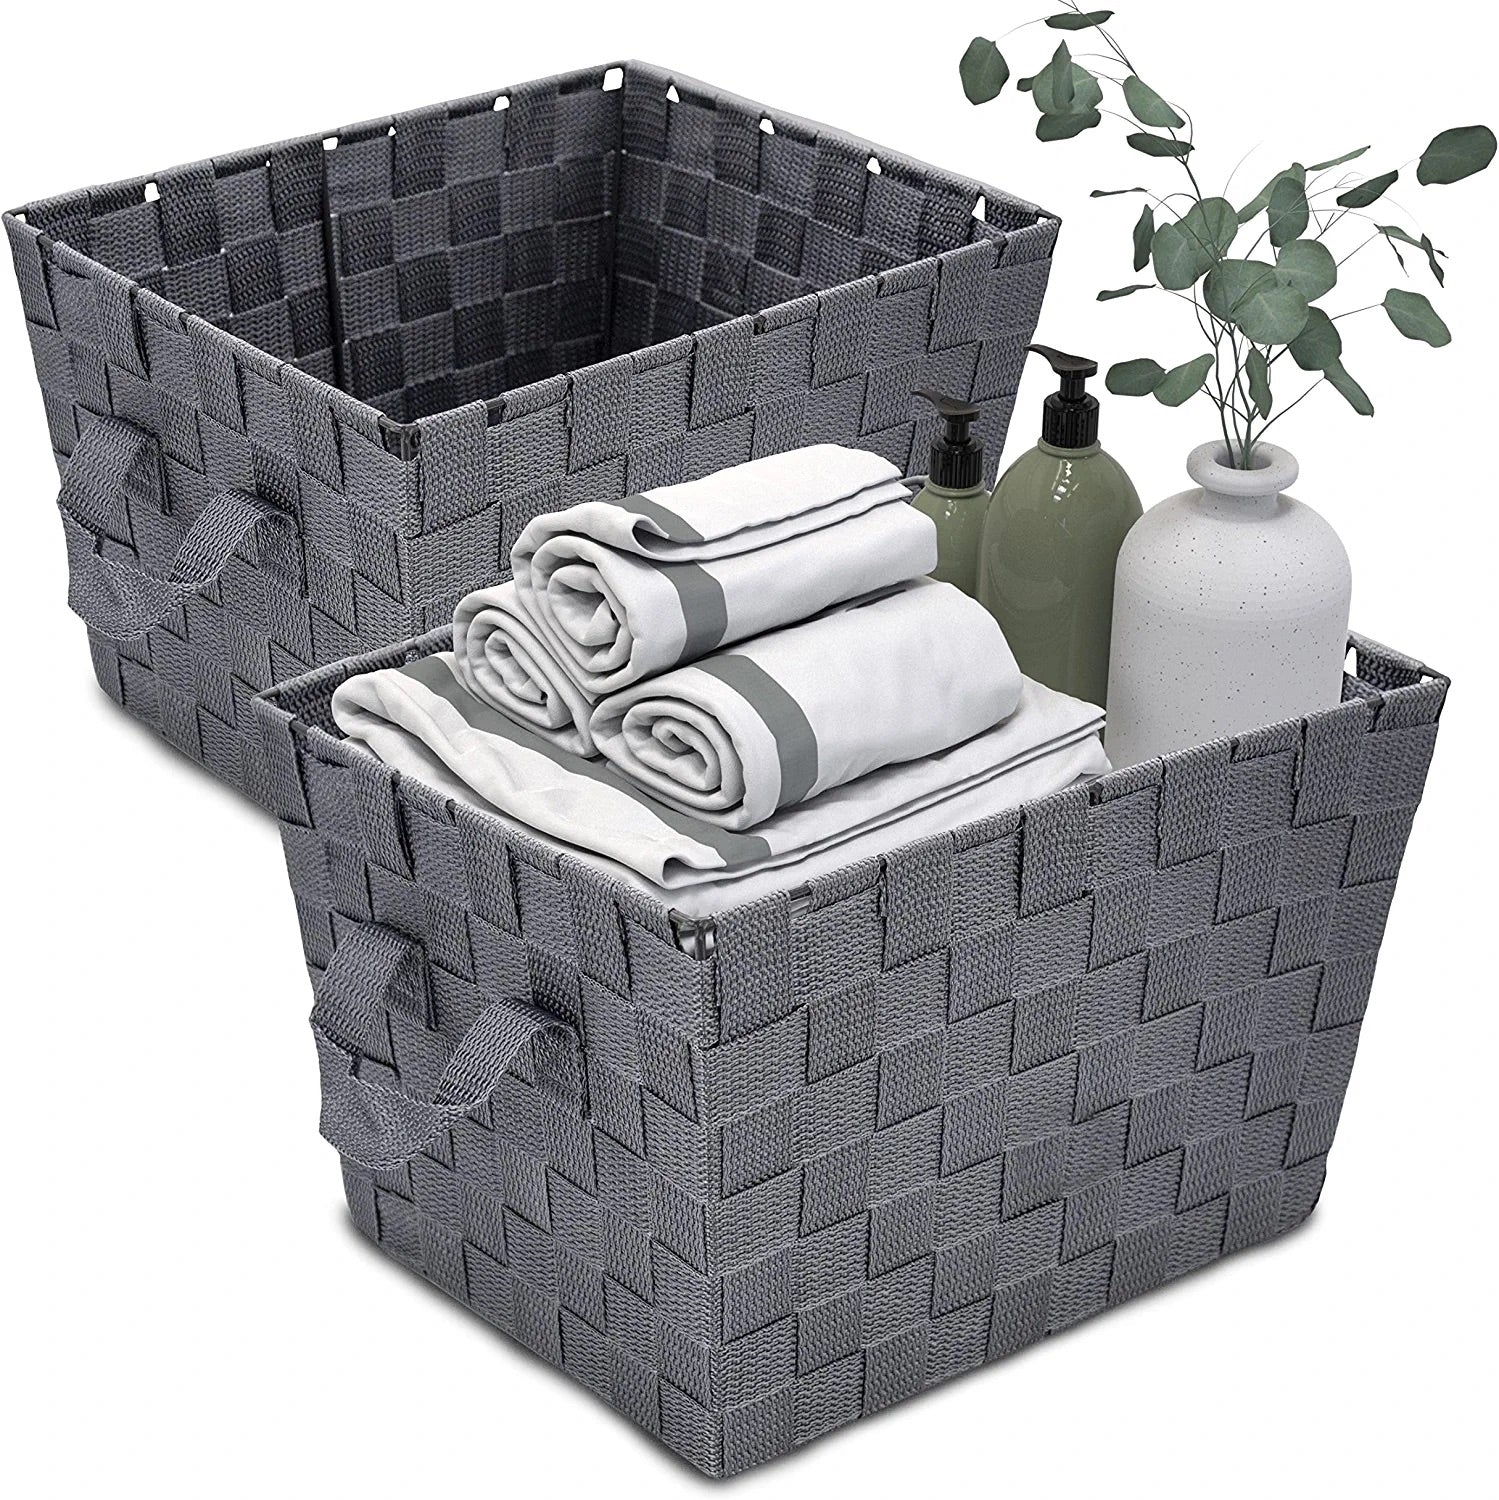 Brookstone 2 Pack Woven Storage Baskets with Handles, Decorative Clothes/Toys/Clutter Organizer, Dark Gray